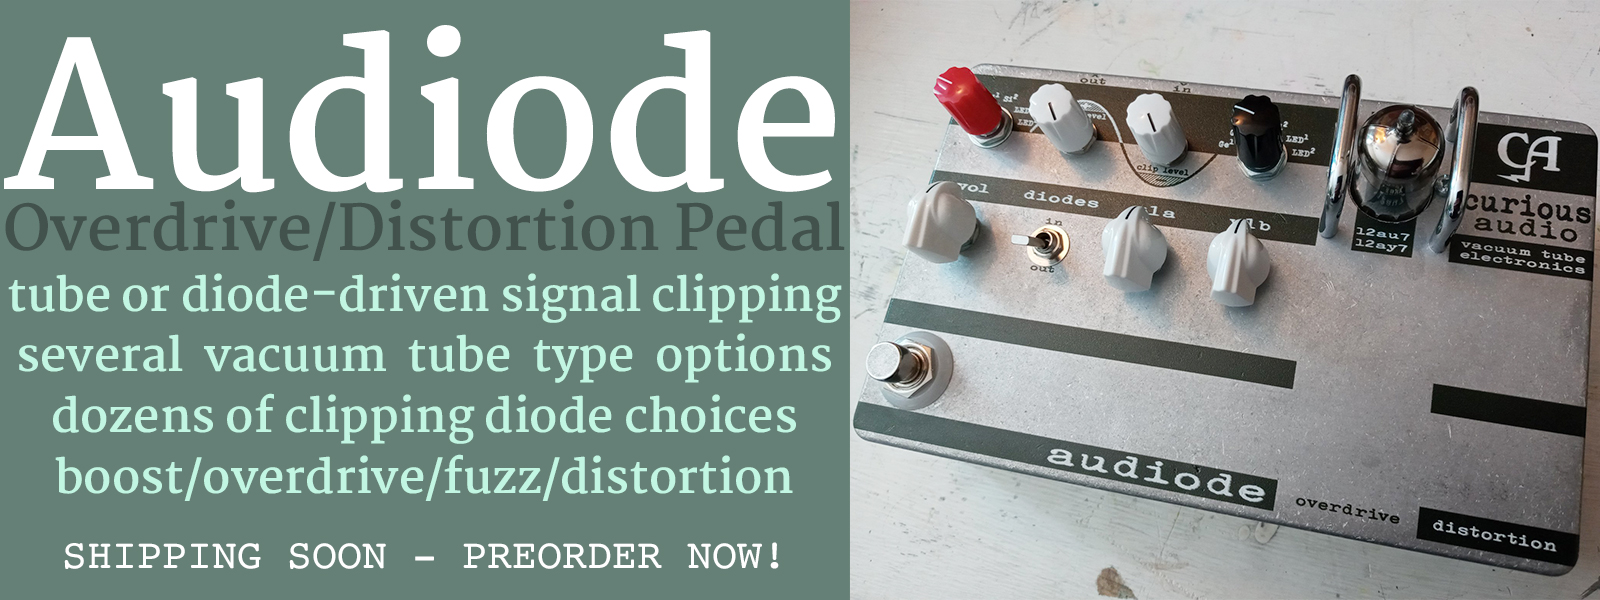 audiode overdrive / distortion pedal